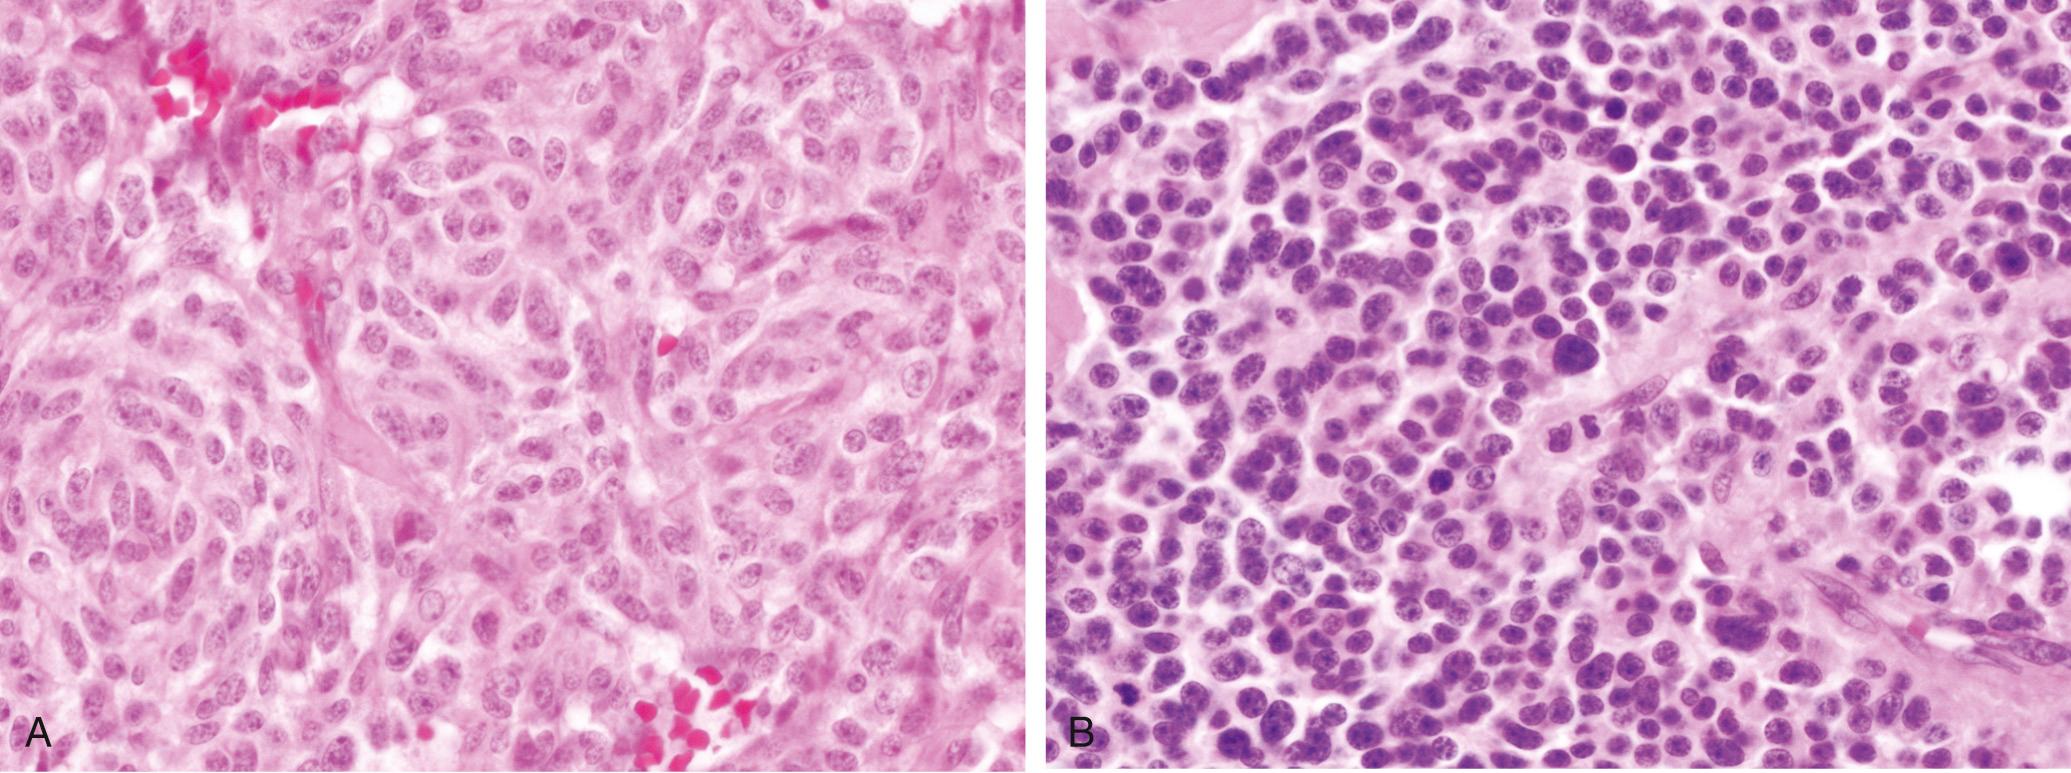 FIGURE 22-1, A, H&E stain of a typical carcinoid. B, H&E stain of an atypical carcinoid.